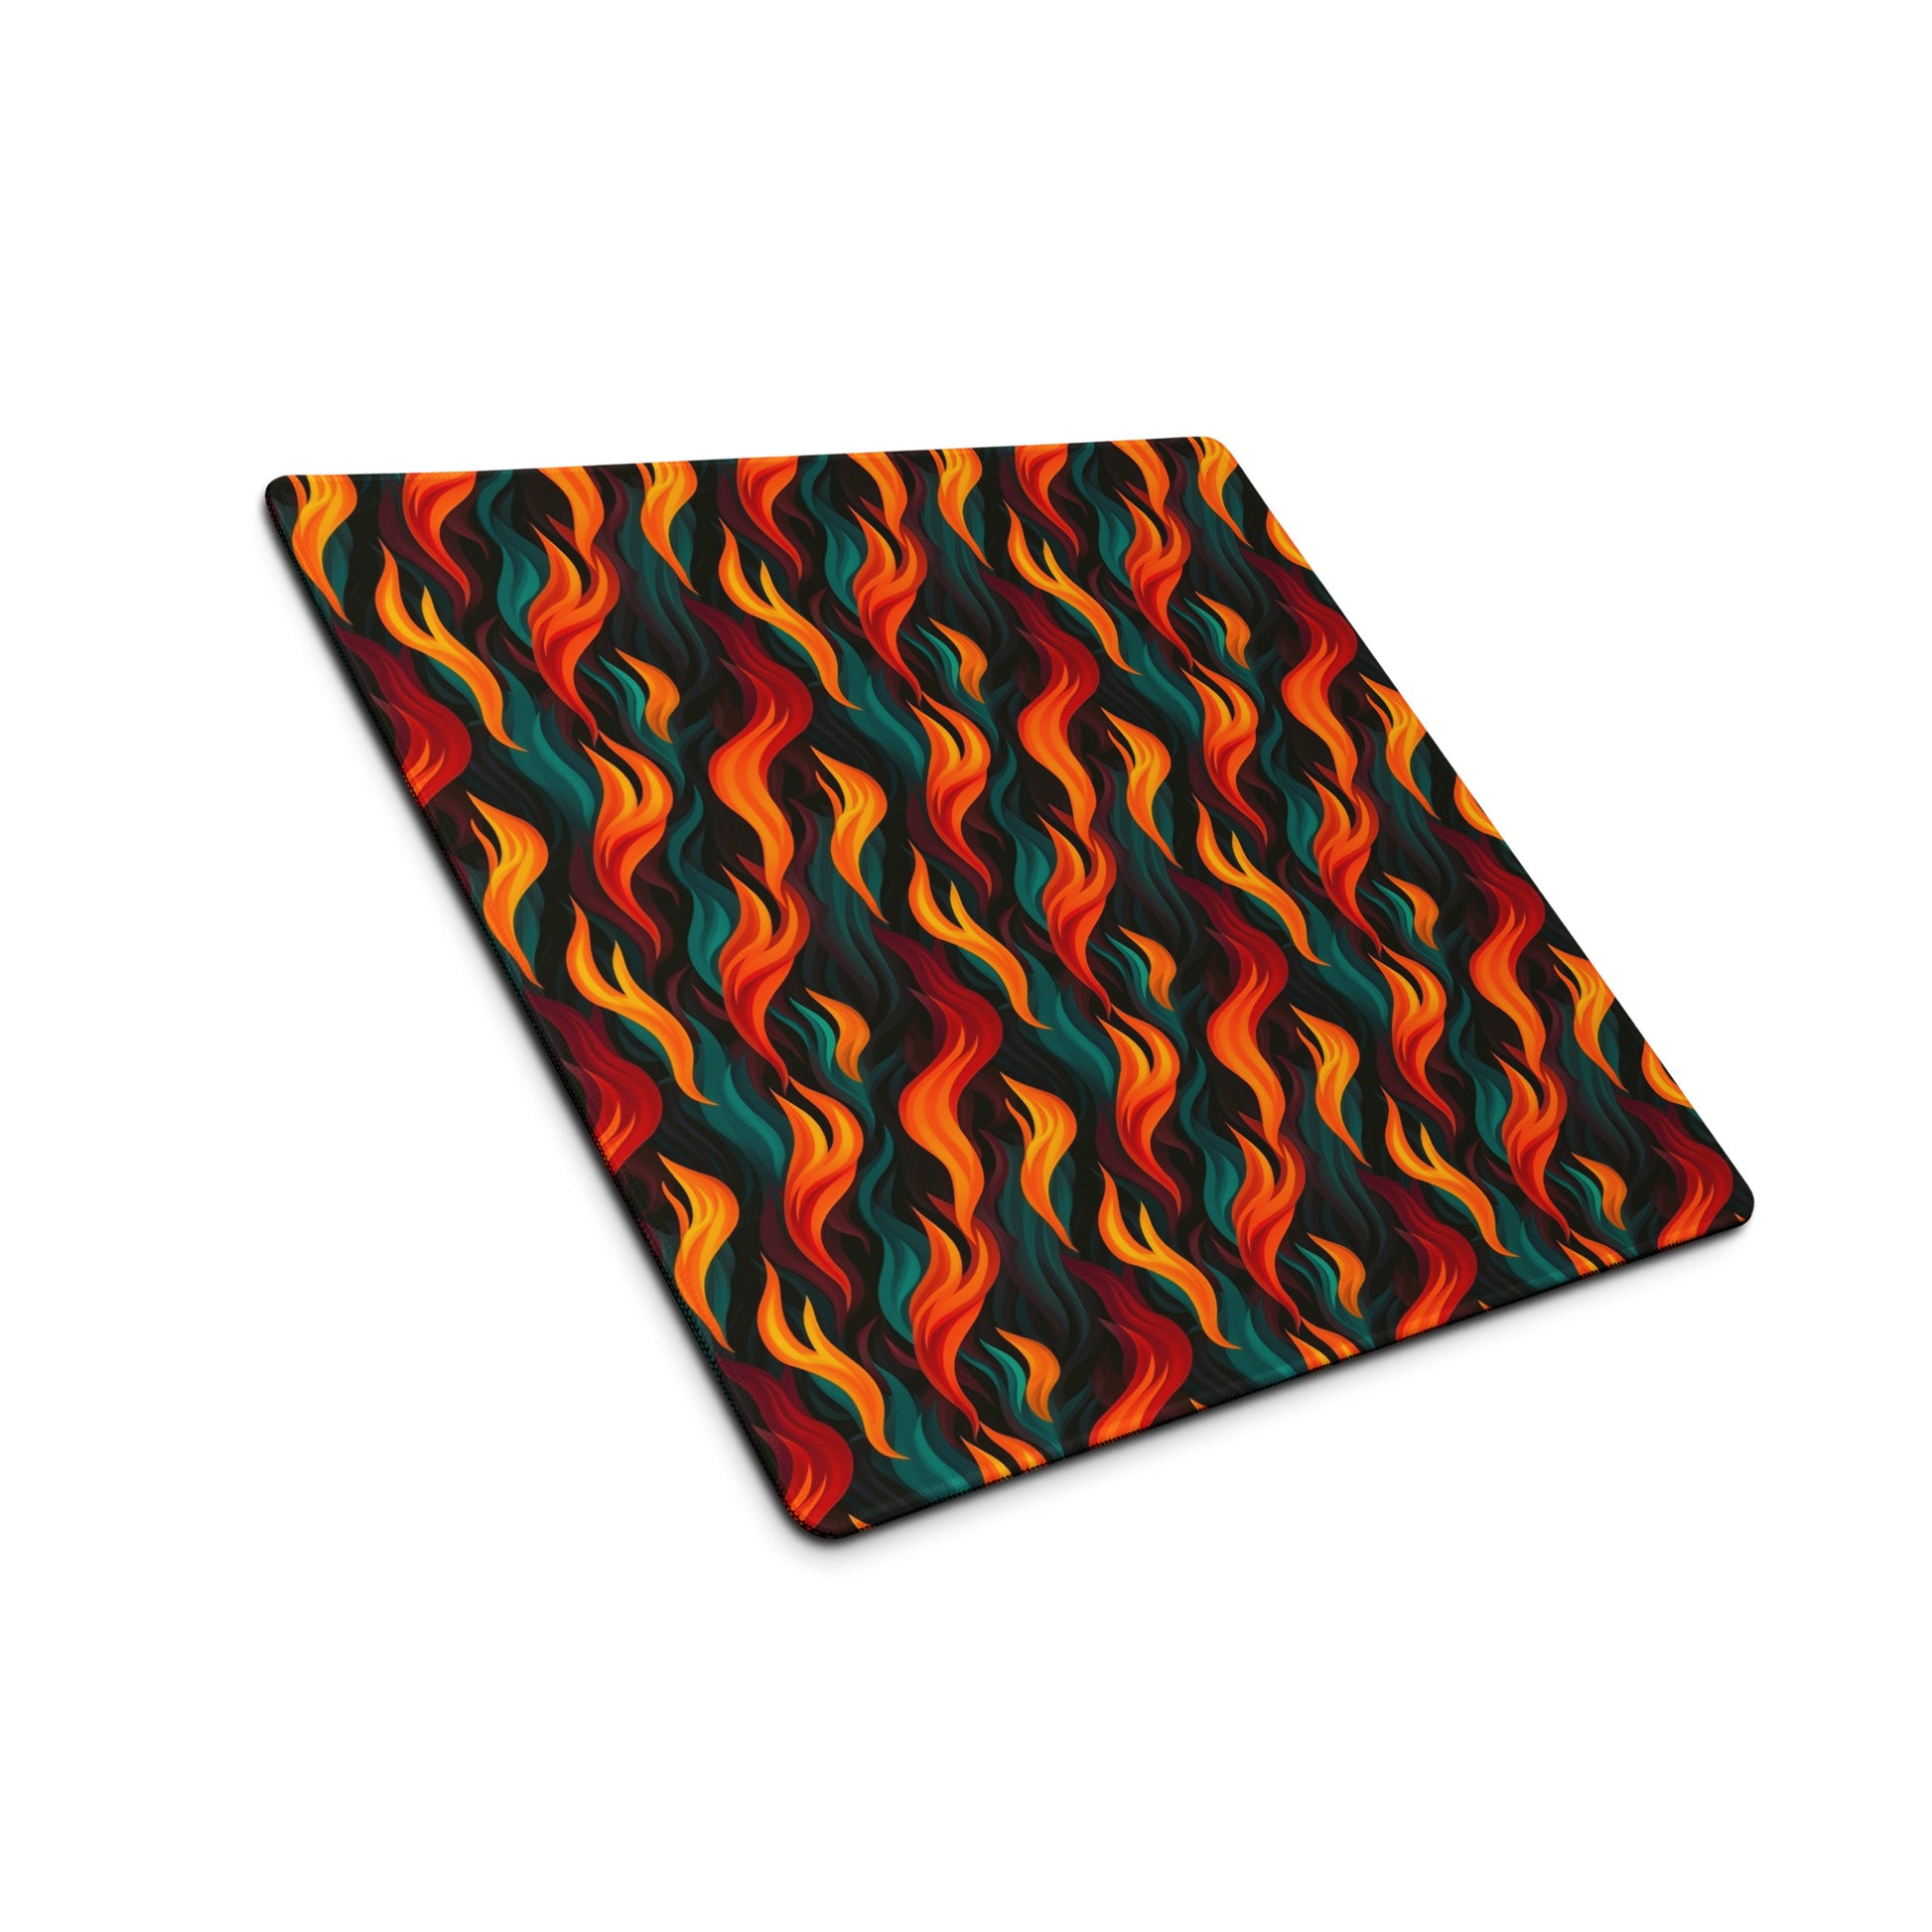 A 18" x 16" desk pad with a wavy flame pattern on it shown at an angle. Red and Teal in color.